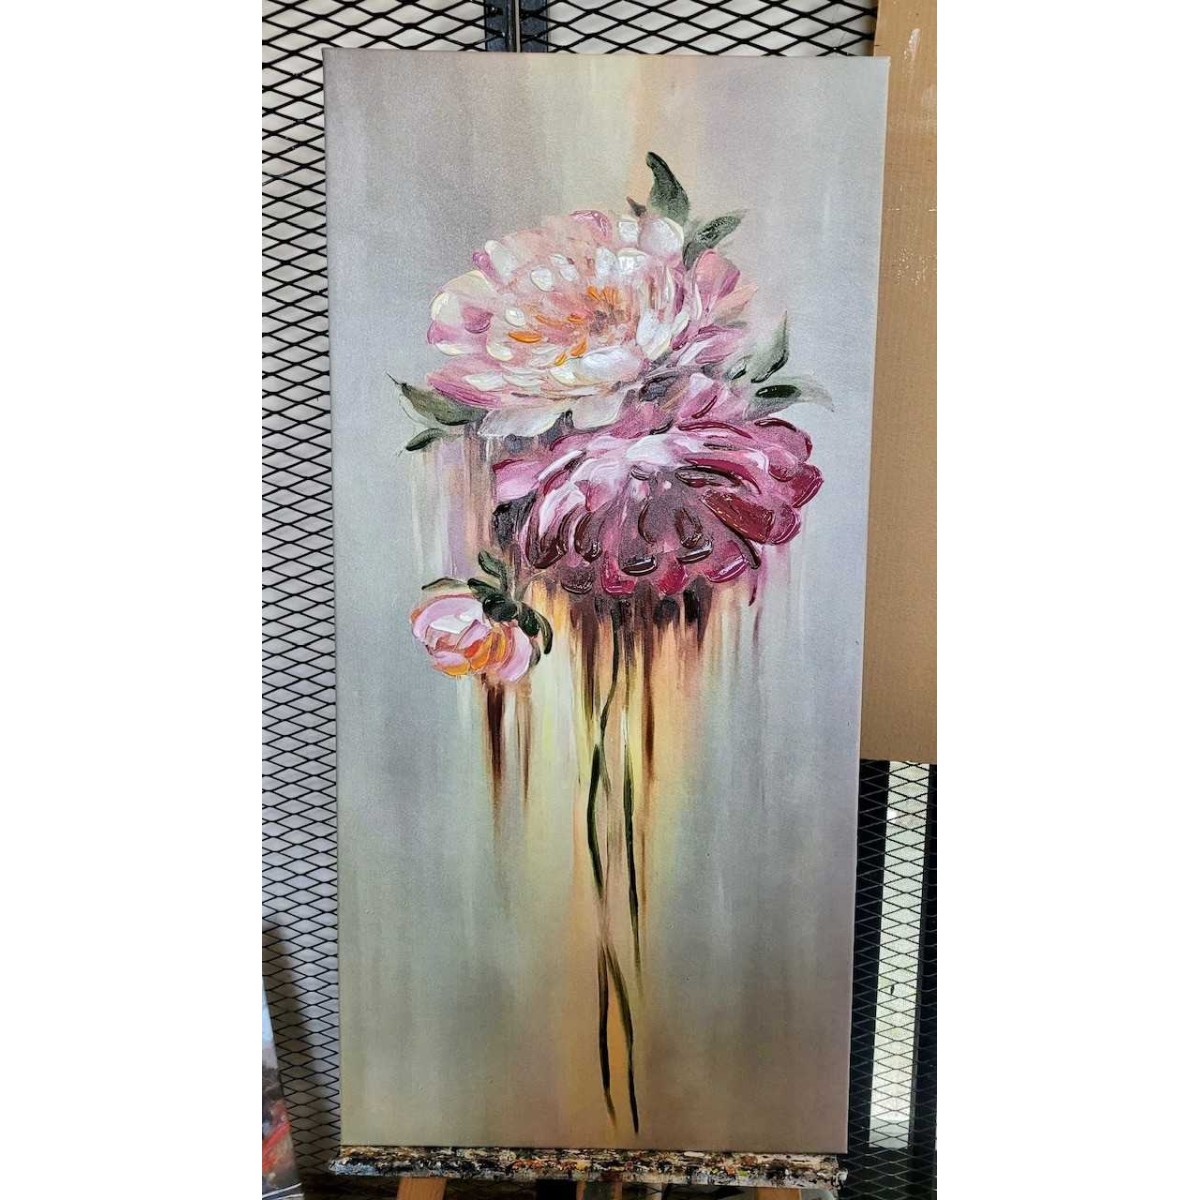 Abstract Floating Flowers Textured Partial Oil Painting